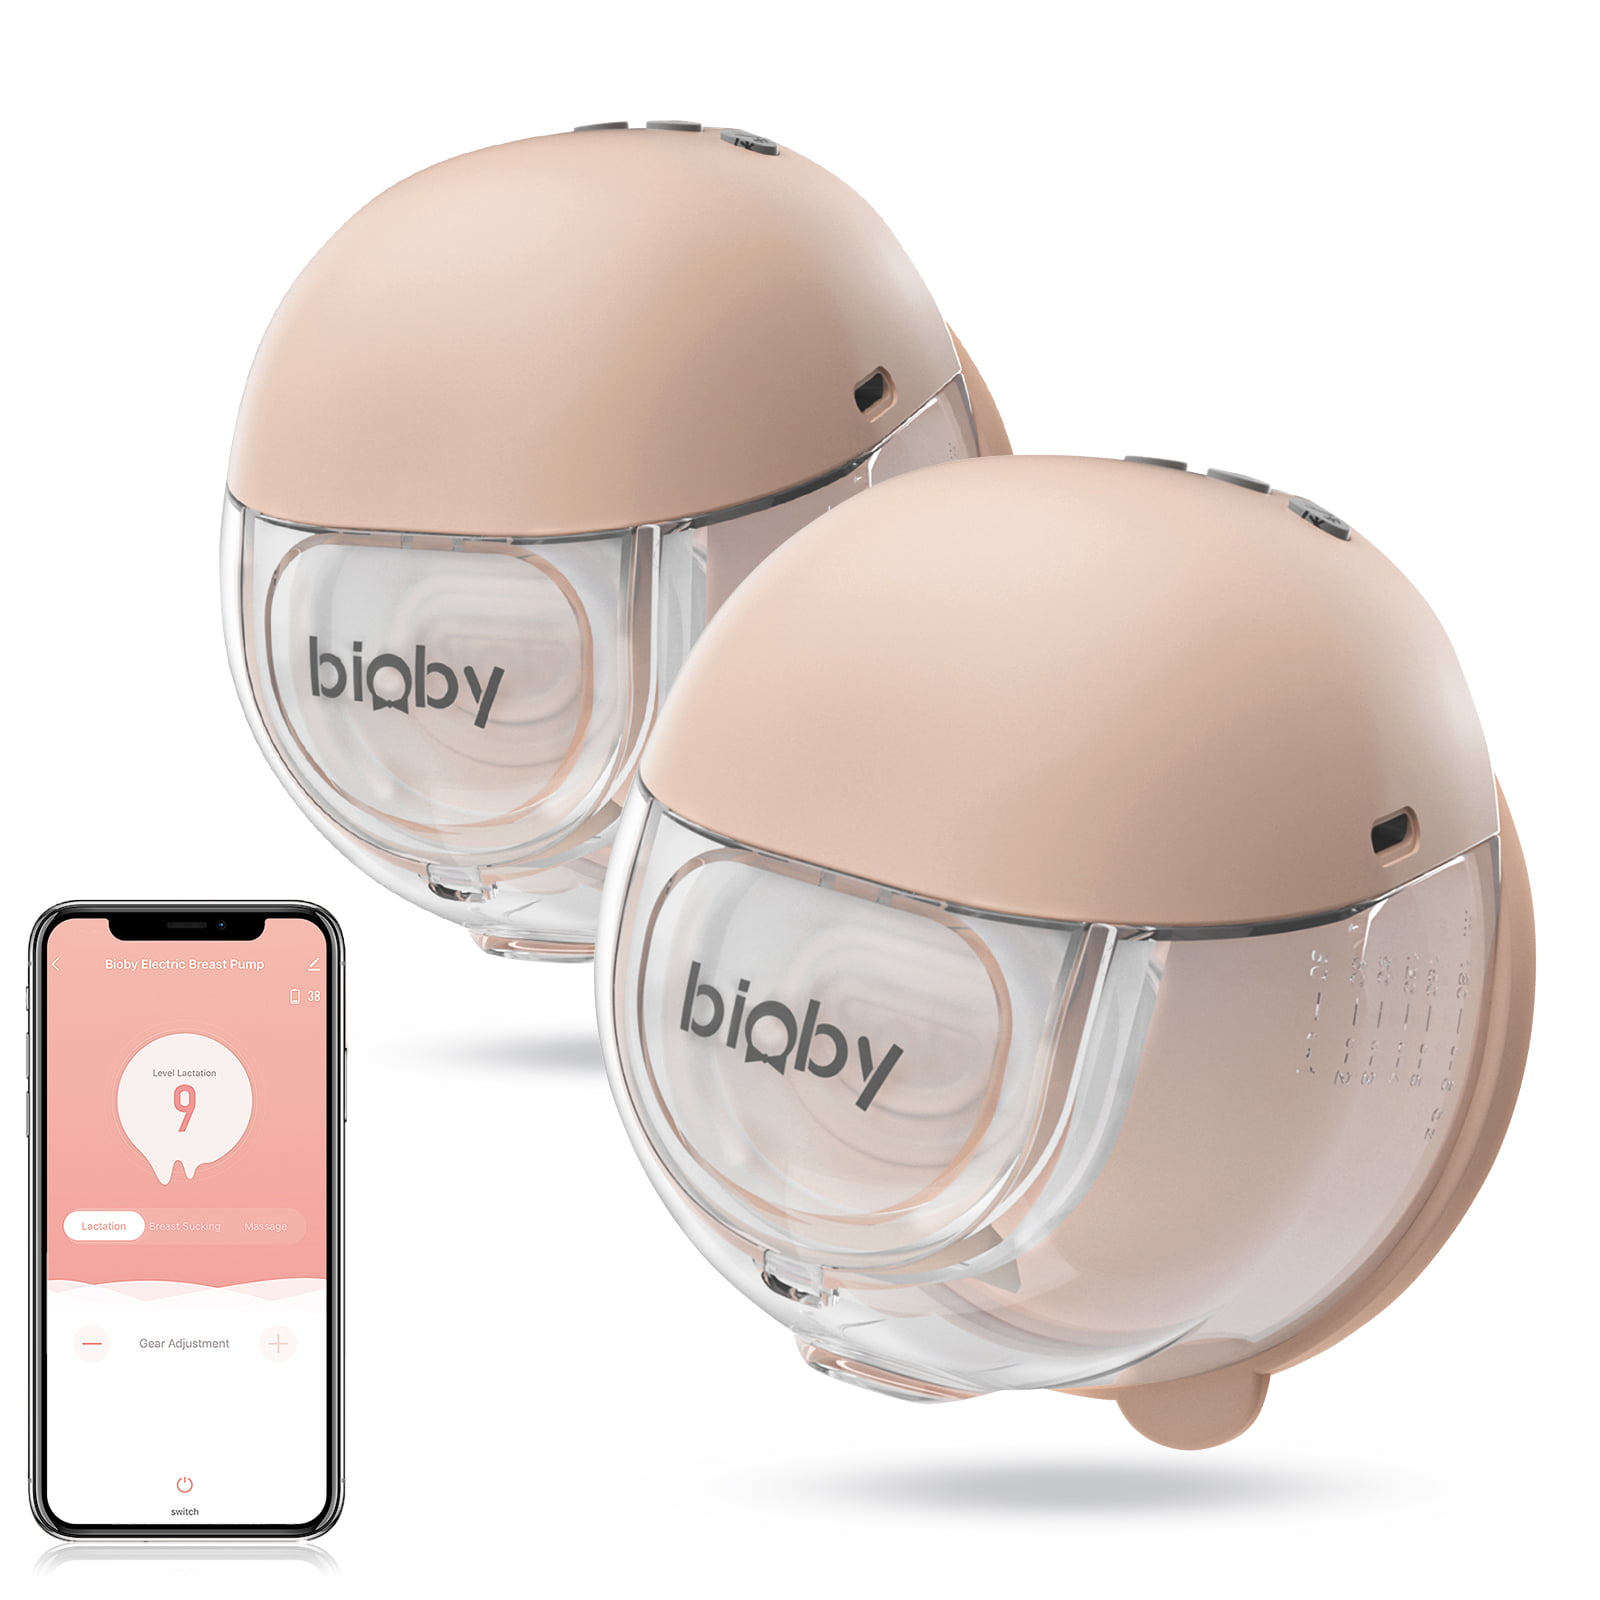 Bioby Electric Wearable Breast Pump,3 Mode & 9 Levels Hands-Free Breastpump with LCD Display,Low Noise & Hands-Free Breast Pump with 24mm Flange 